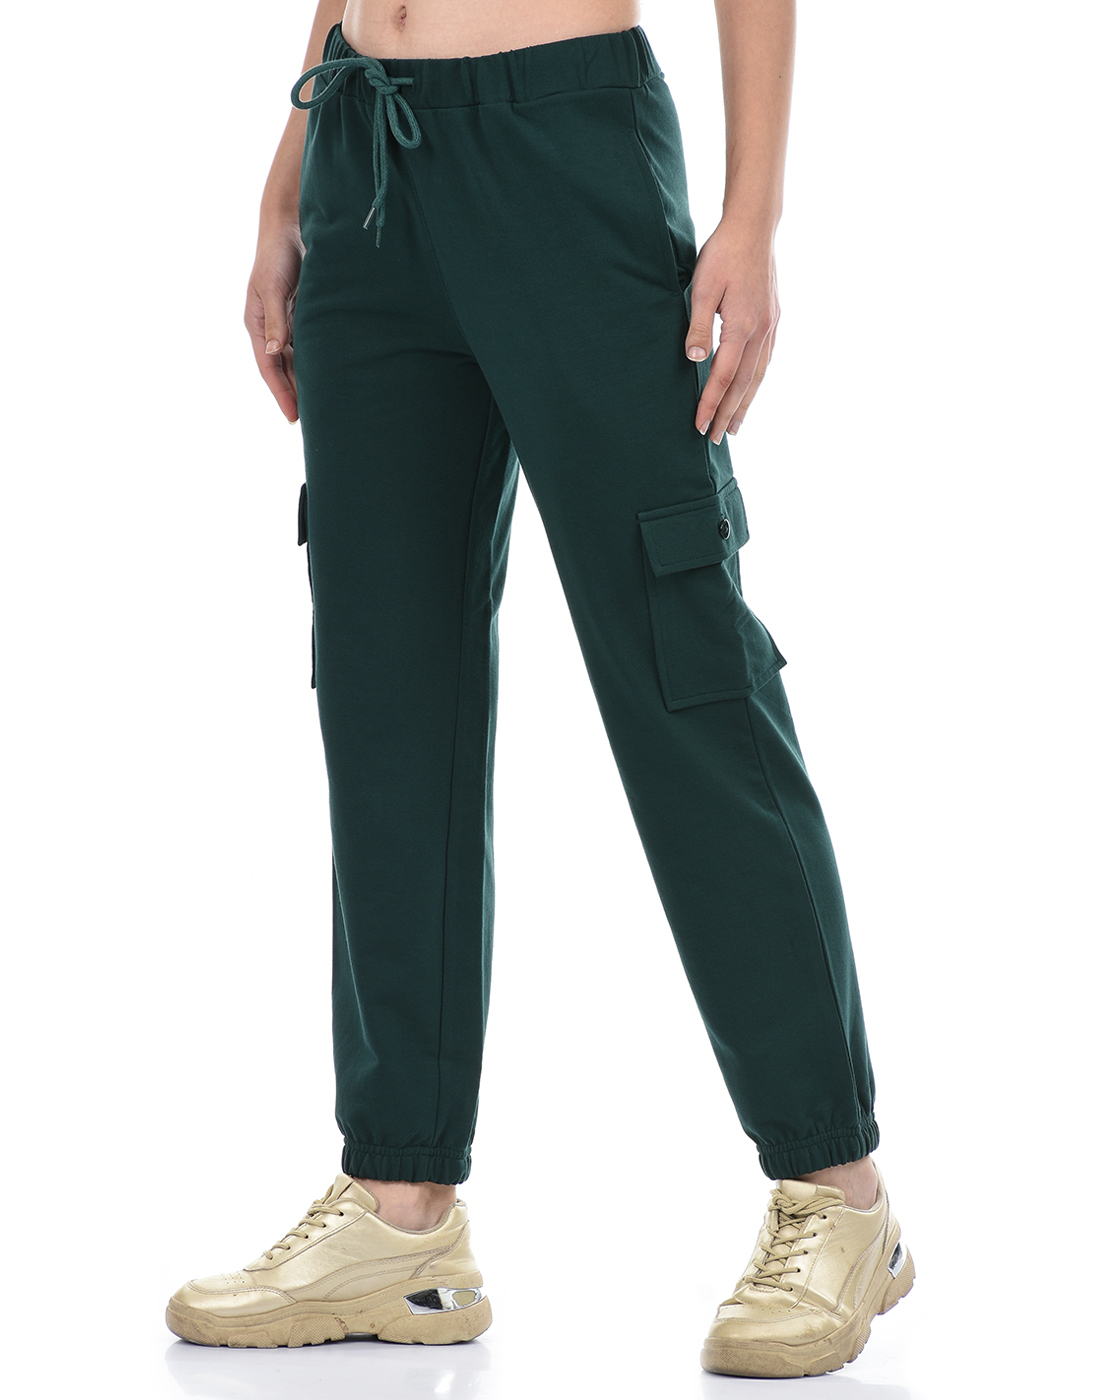 Oneway Women Solid Green Track Pants